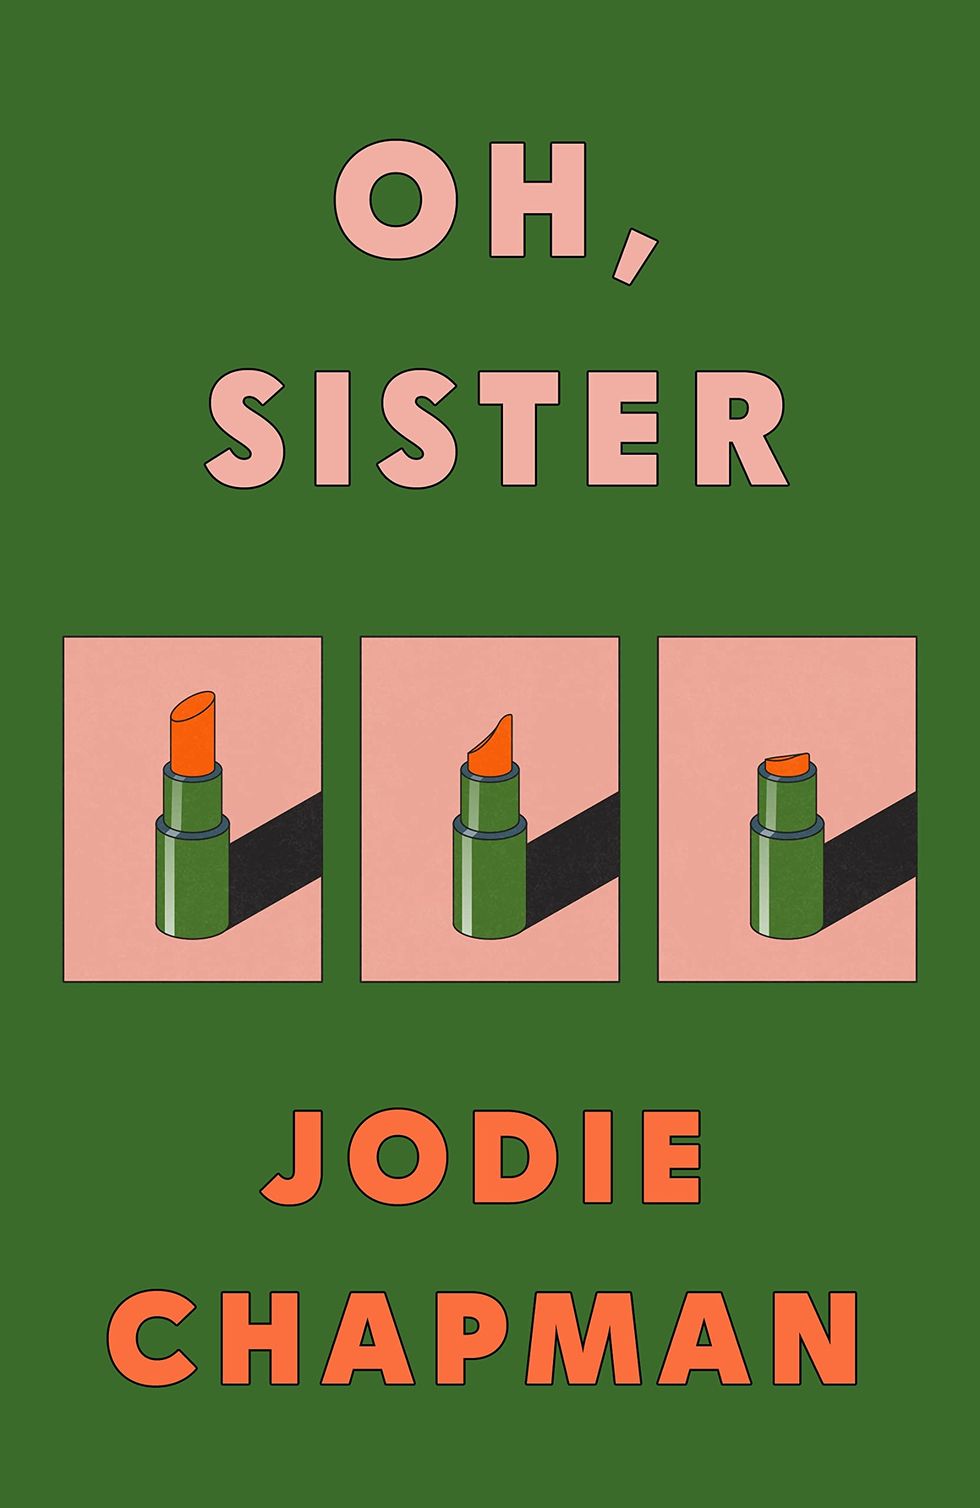 Oh, Sister by Jodie Chapman